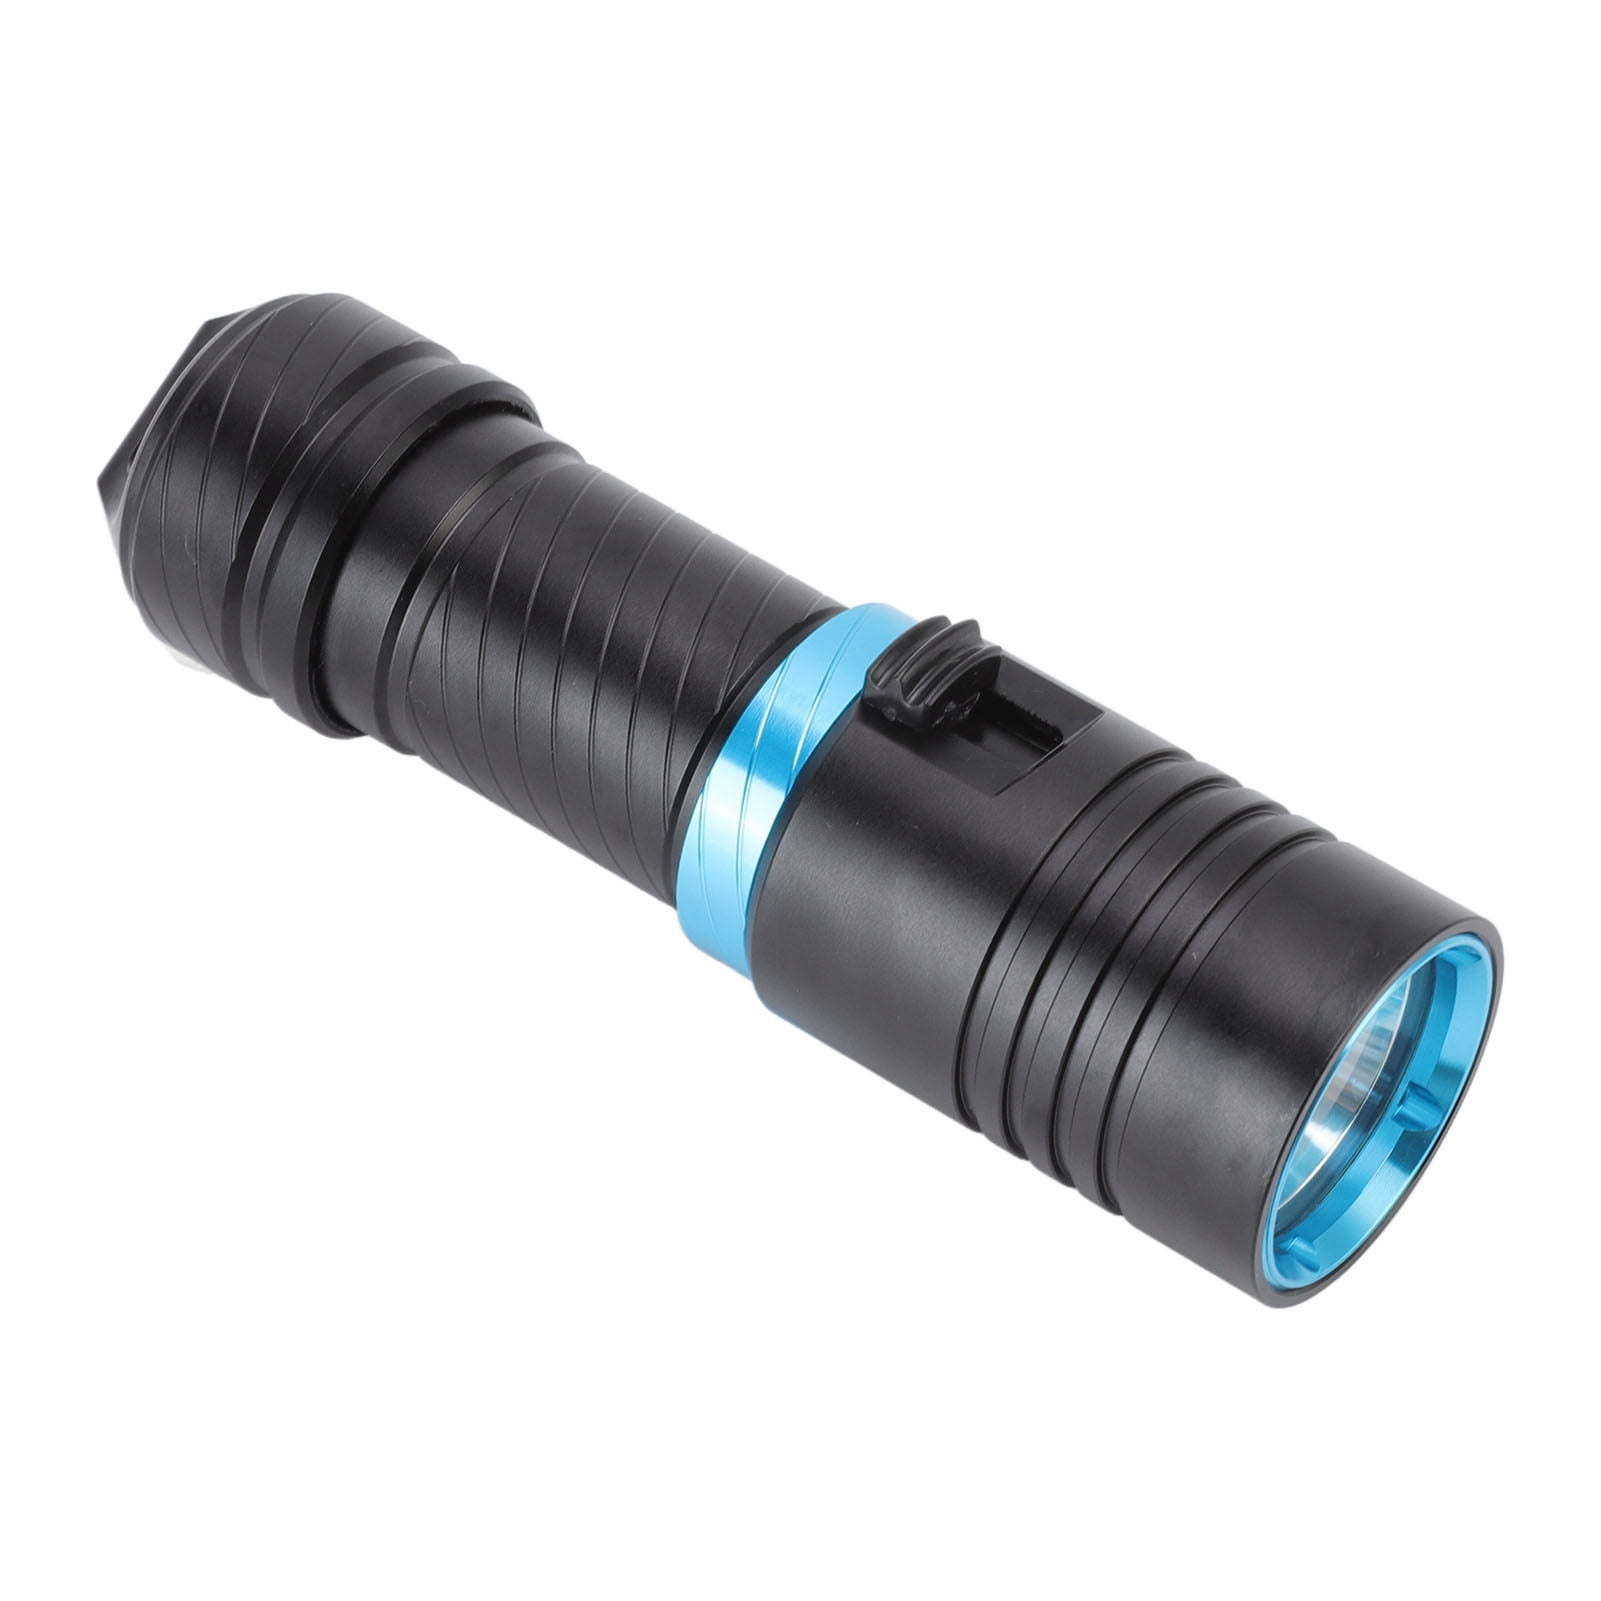 Dive Flashlight Scuba FAGINEY Lights,Dive Beads LED IPX8 100m Diving Waterproof Dimmable Dive For Lights Infinitely Underwater Light,5000LM Scuba L2 Diving